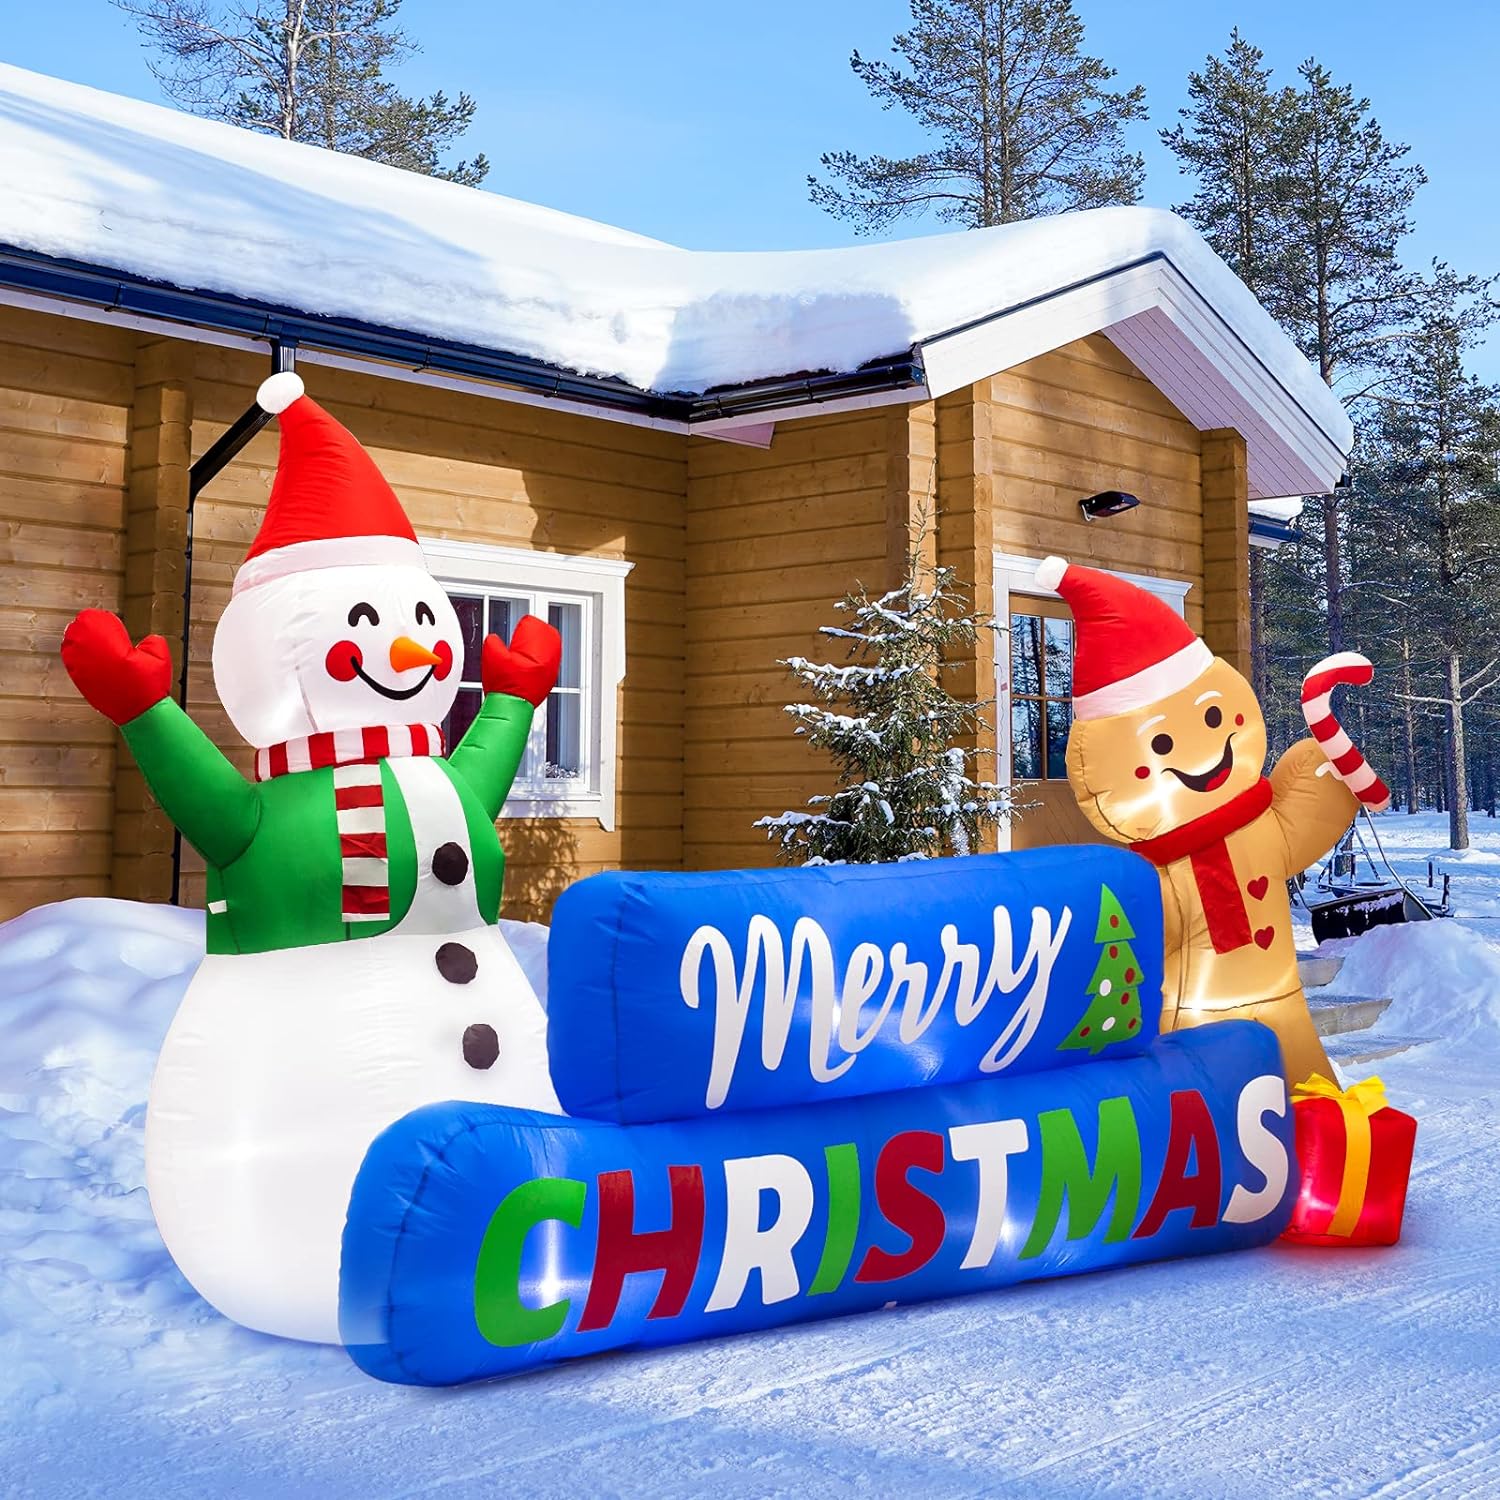 COOBILY 9FT Long Merry Christmas Banner Outdoor Inflatables Decorations with LED Lights, Happy Snowman Inflatable Gingerbread Man Gift Box Decoration Blow Ups Yard Holiday Xmas Party Decor